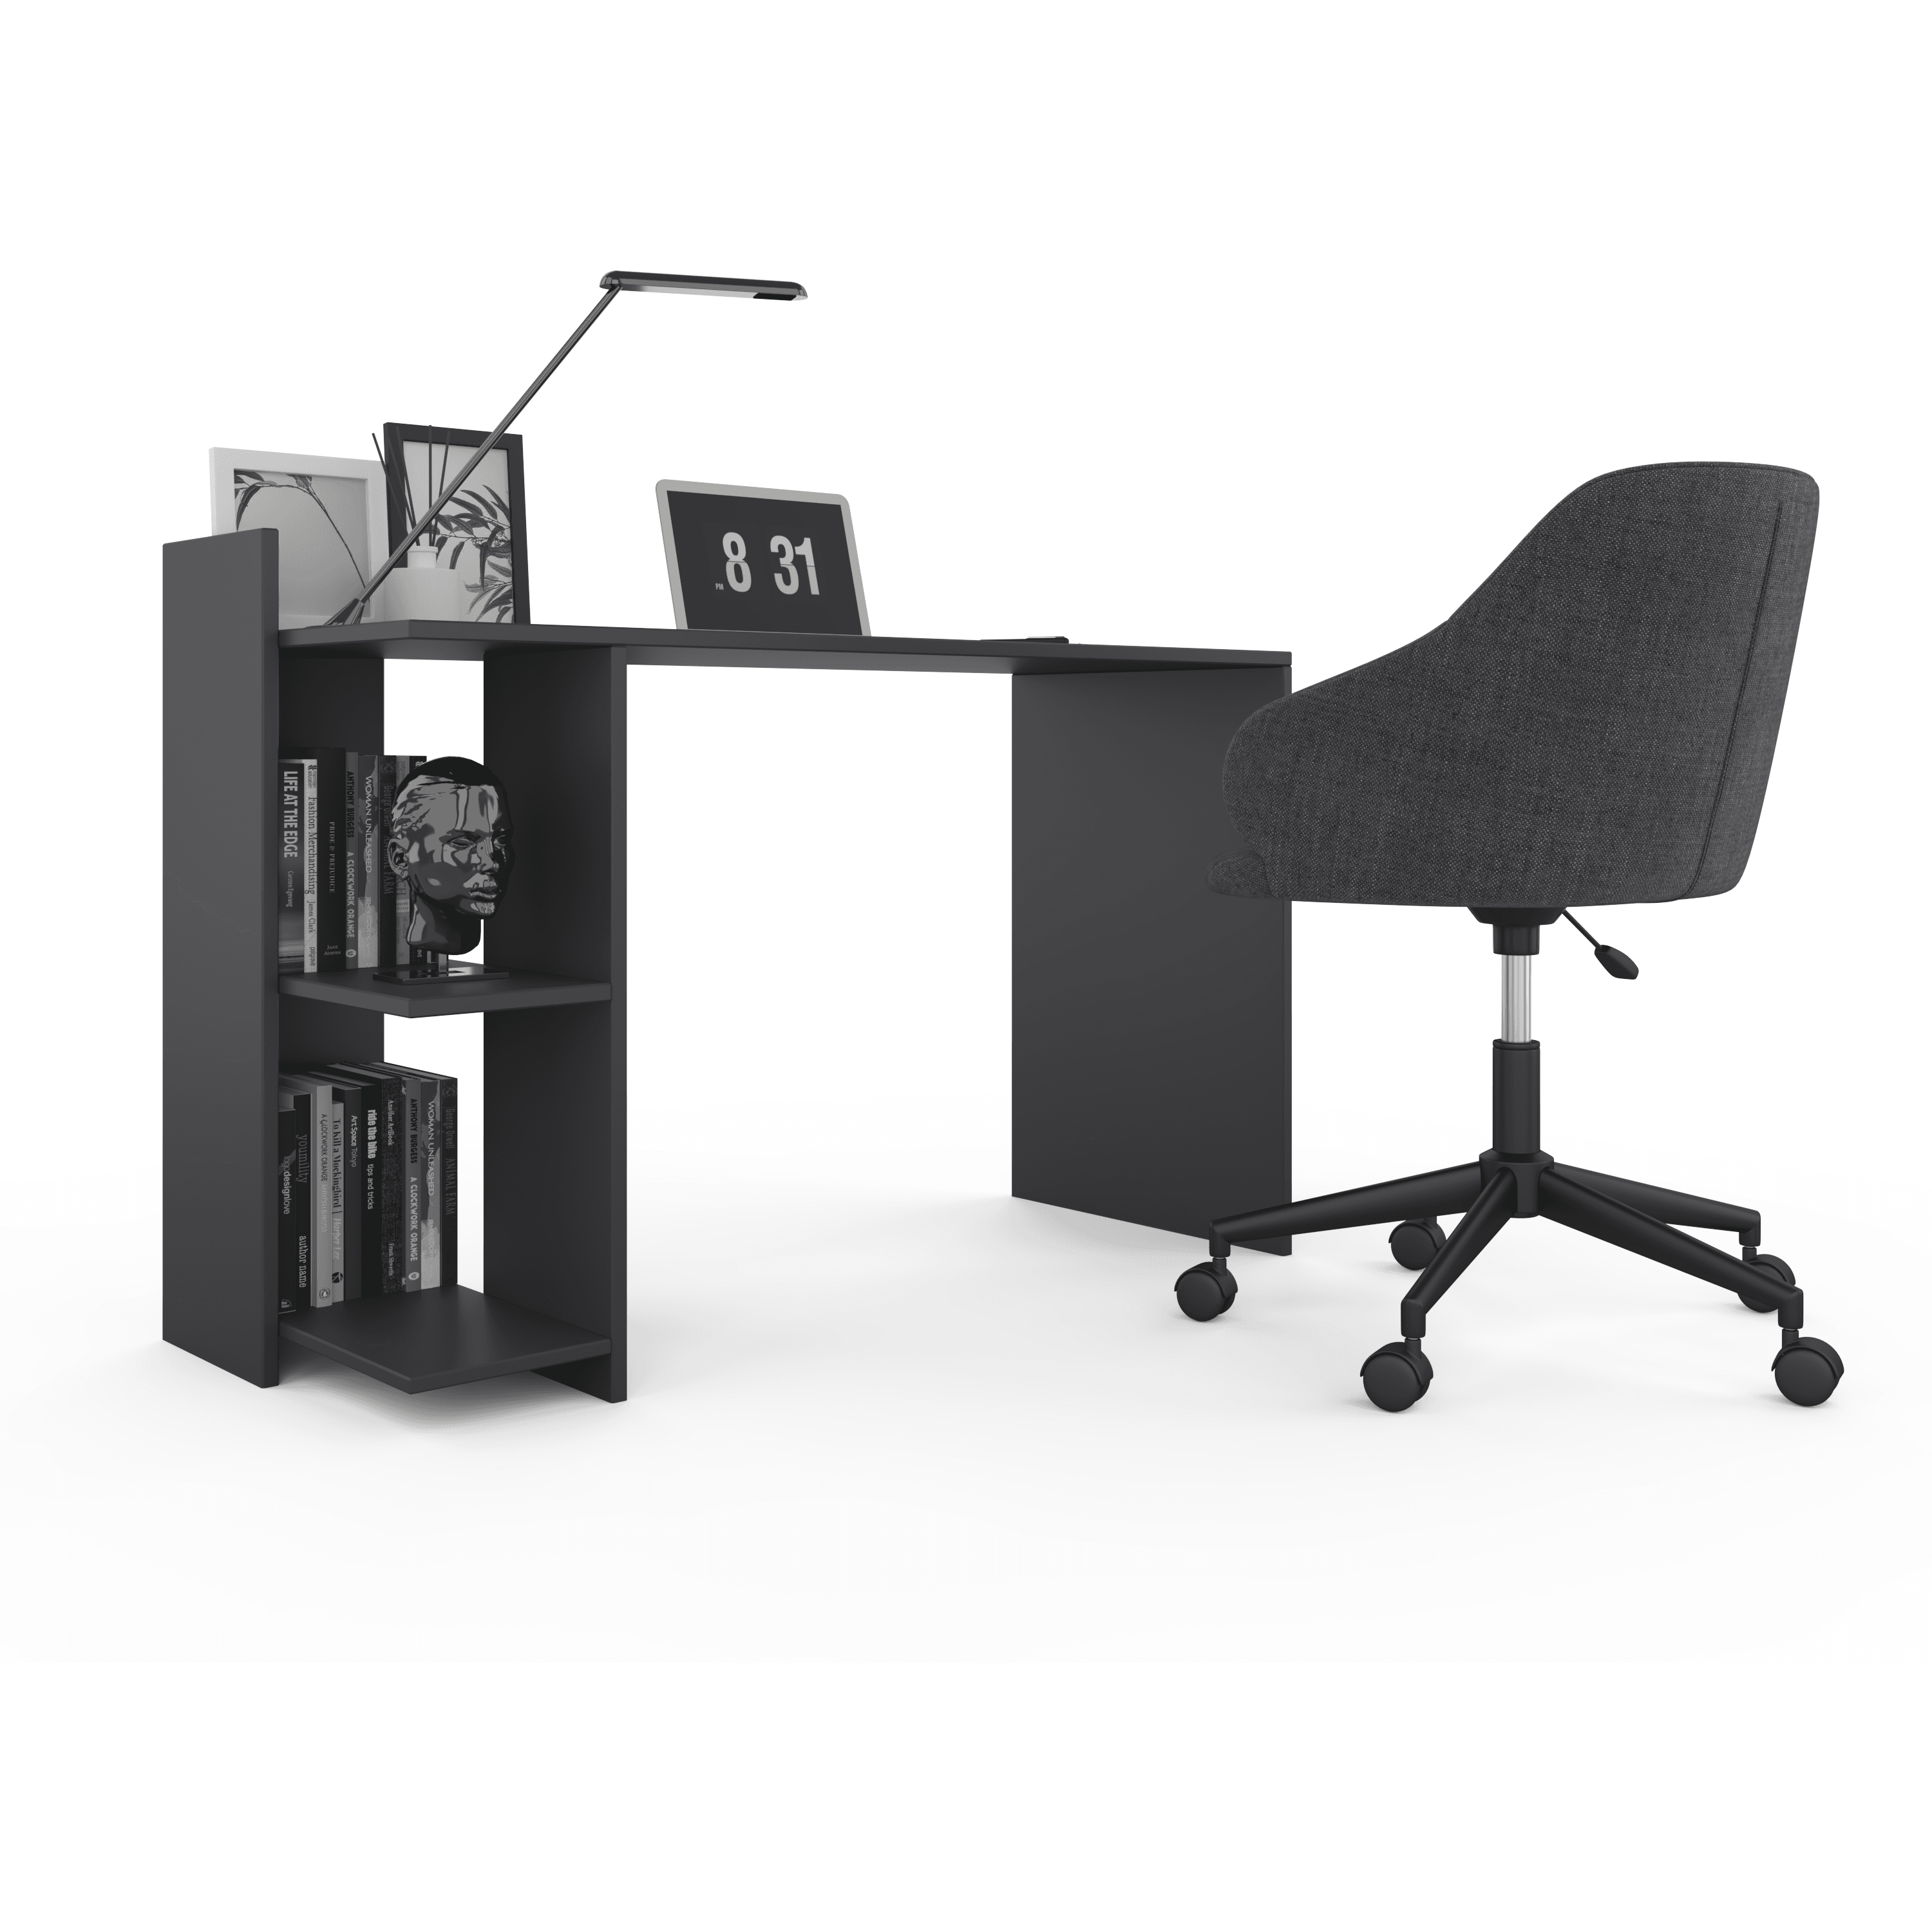 Malta Office Table - Anthracite